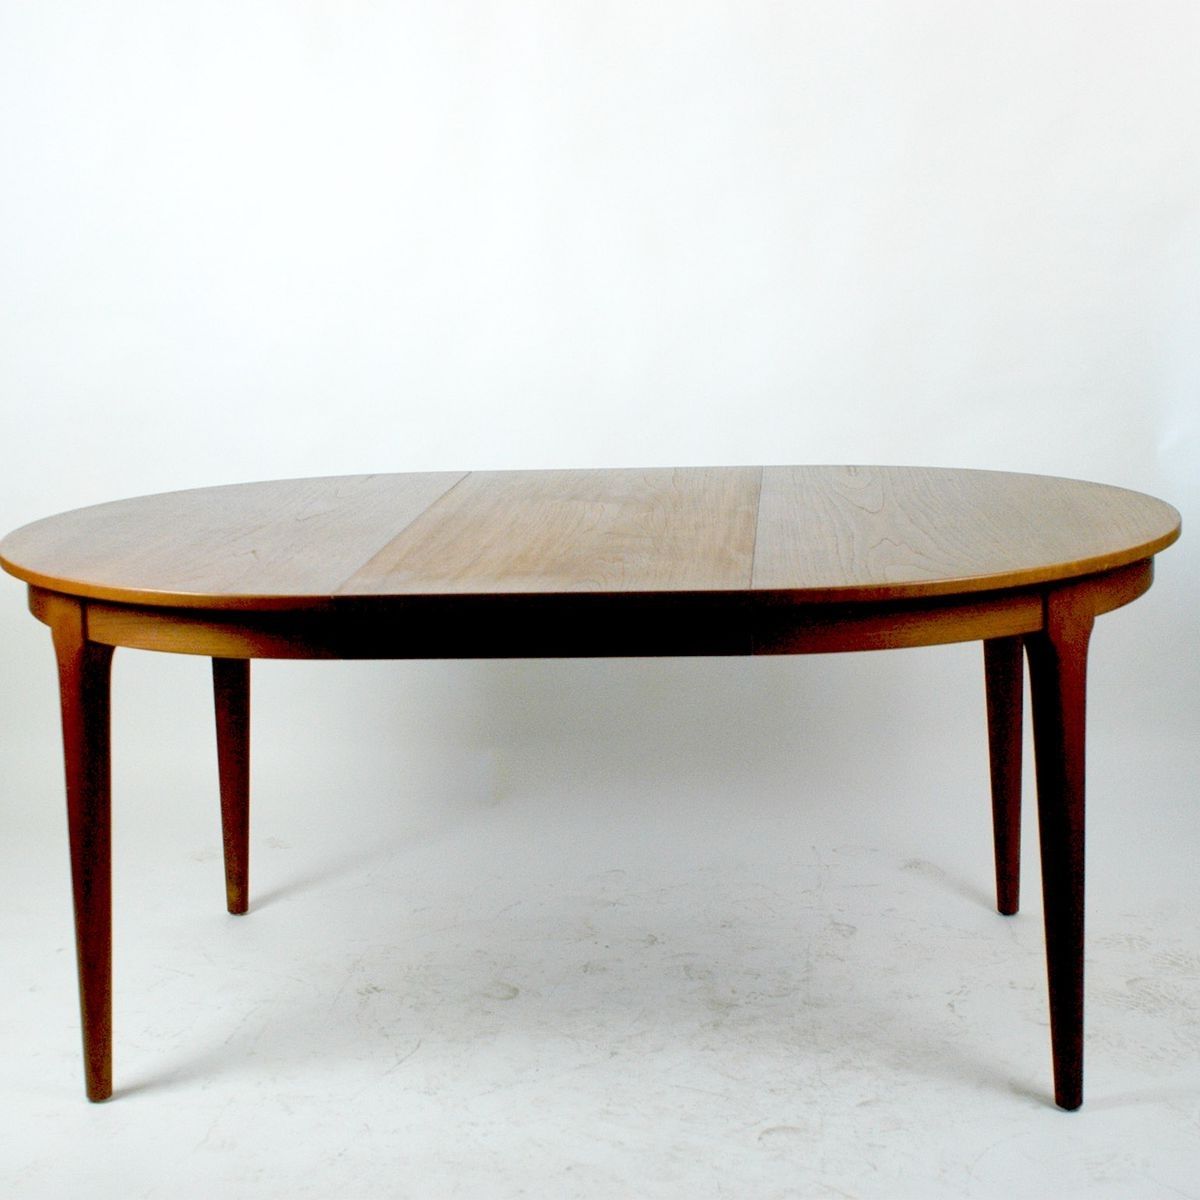 Most Popular Danish Dining Tables Within Danish Circular Extendable Dining Tablefrem Røjle, 1960s For (View 18 of 25)